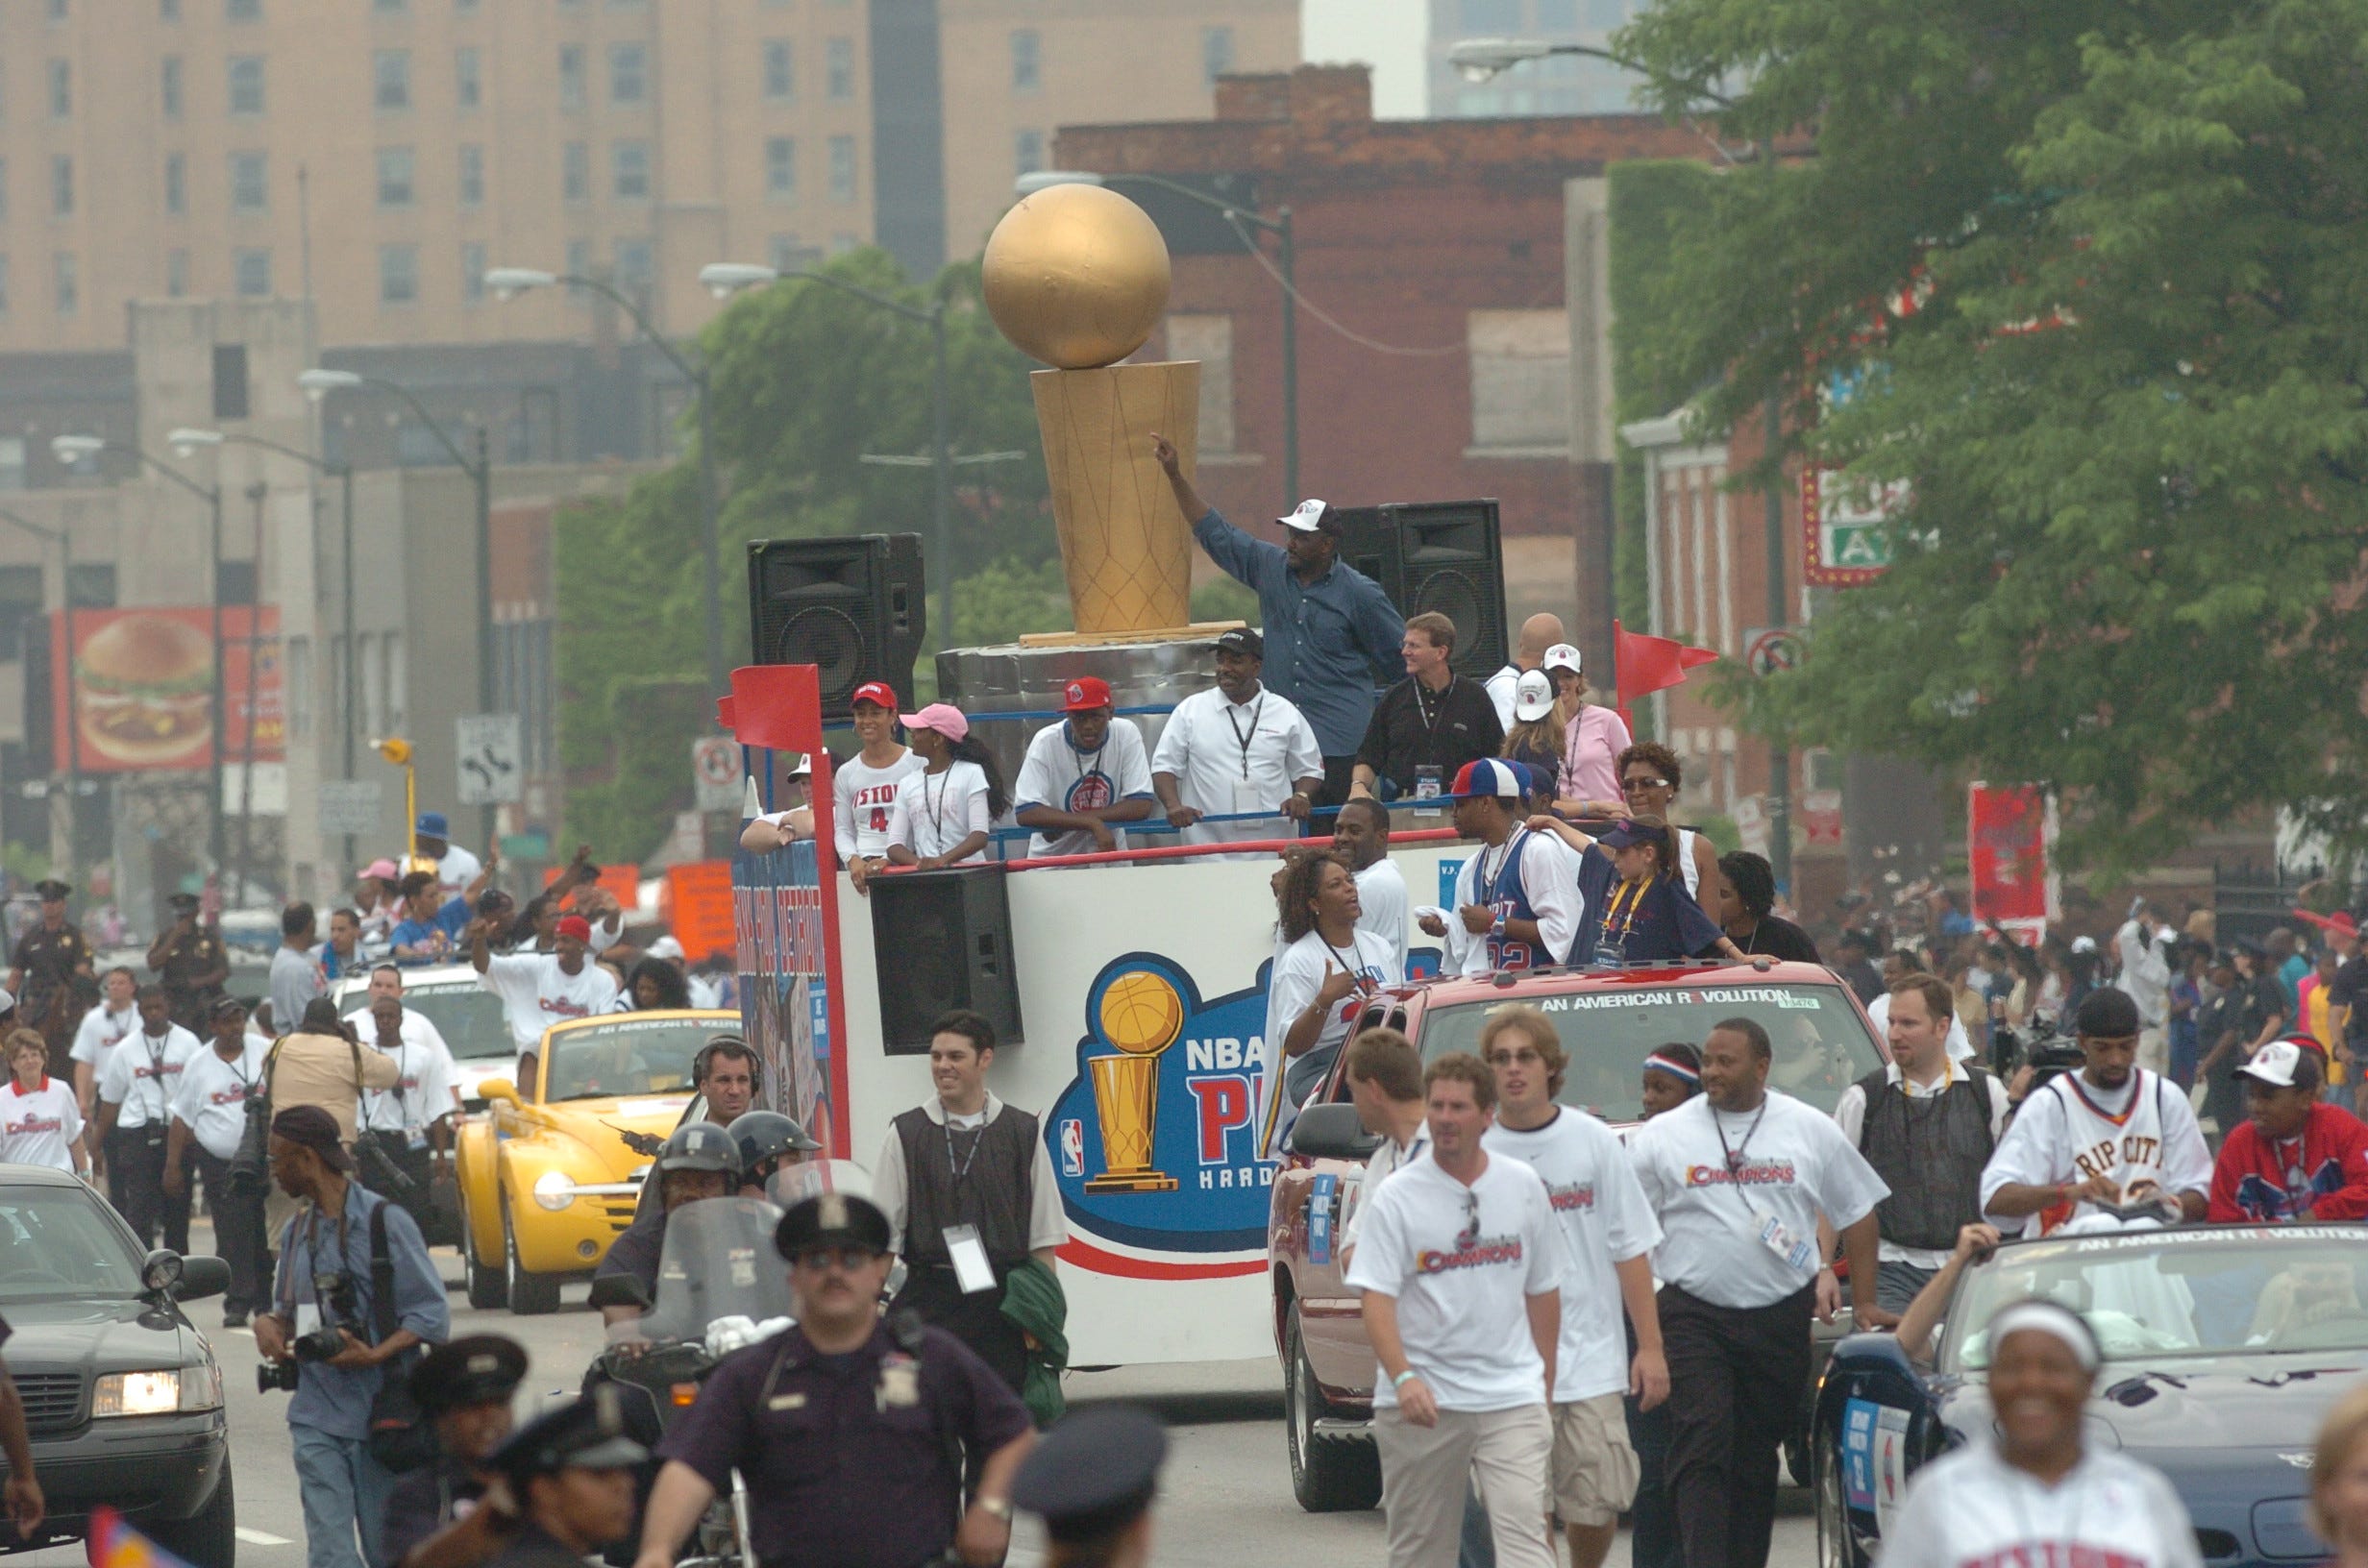 The Detroit Pistons celebrated their NBA championship with a parade down Jefferson Ave.